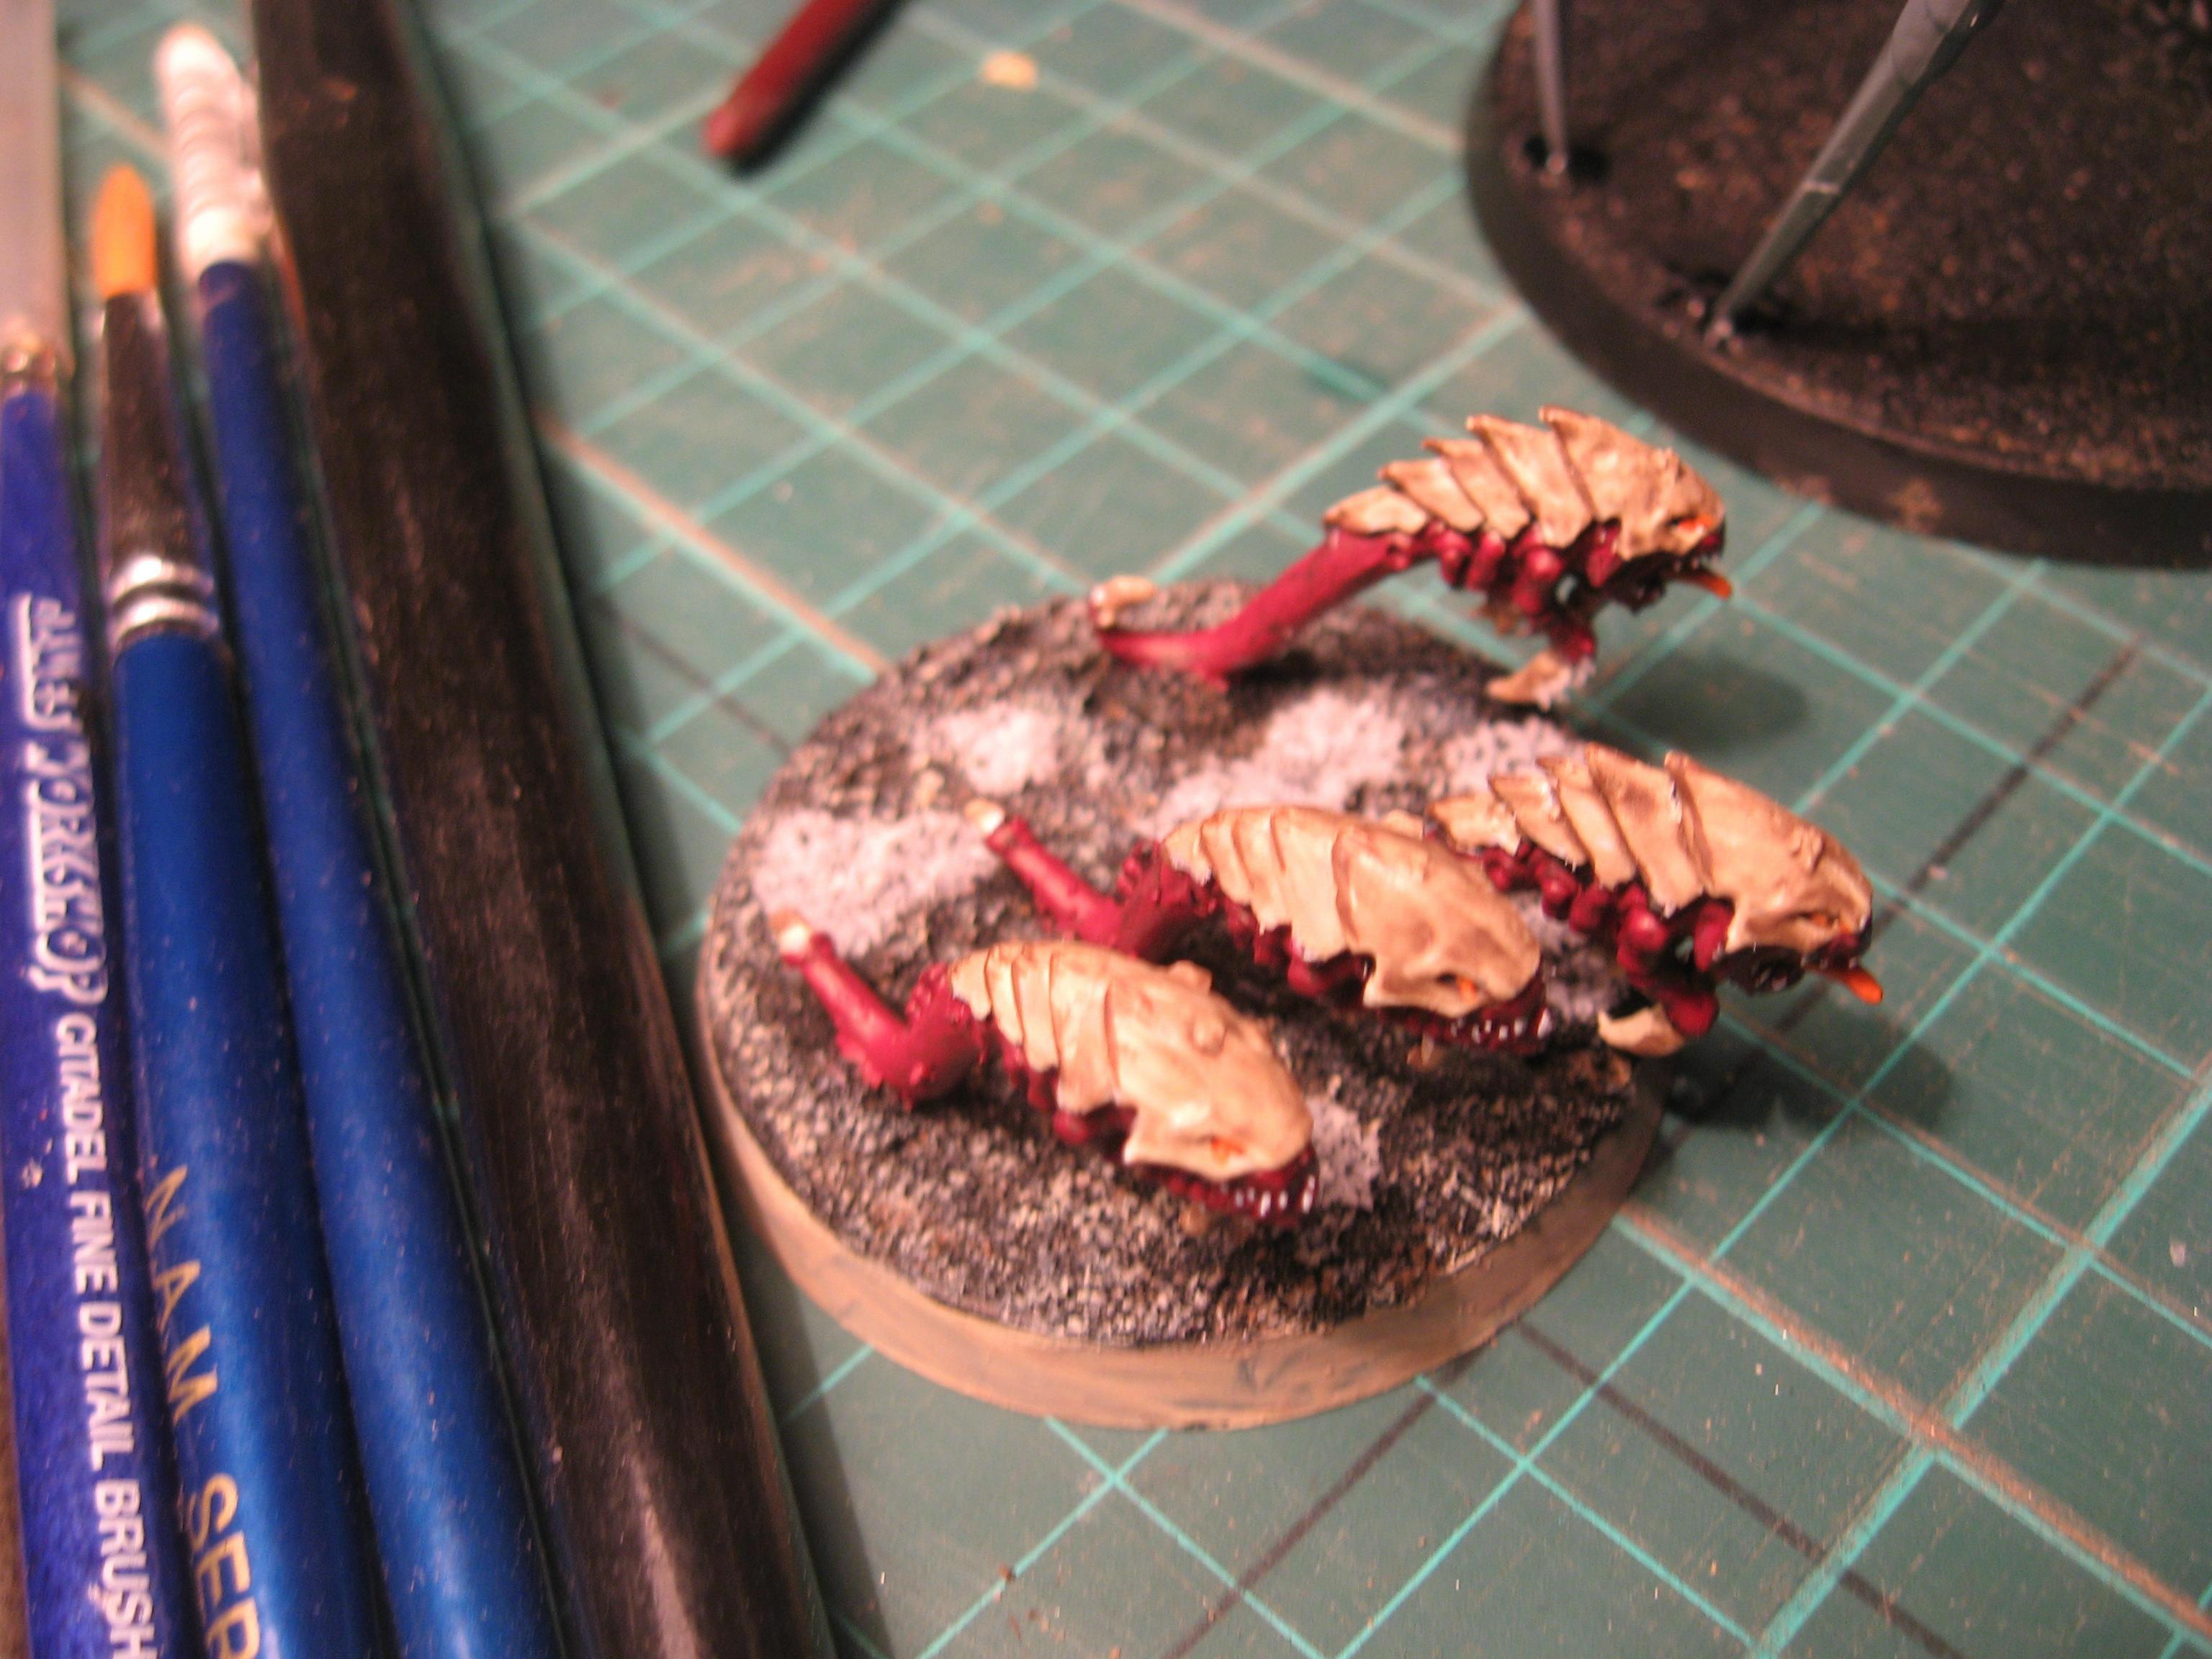 Carnifex, Conversion, Fex, God, Godfex, Herder, Painted, Squigs, Tyranids, Work In Progress, Wysiwyg